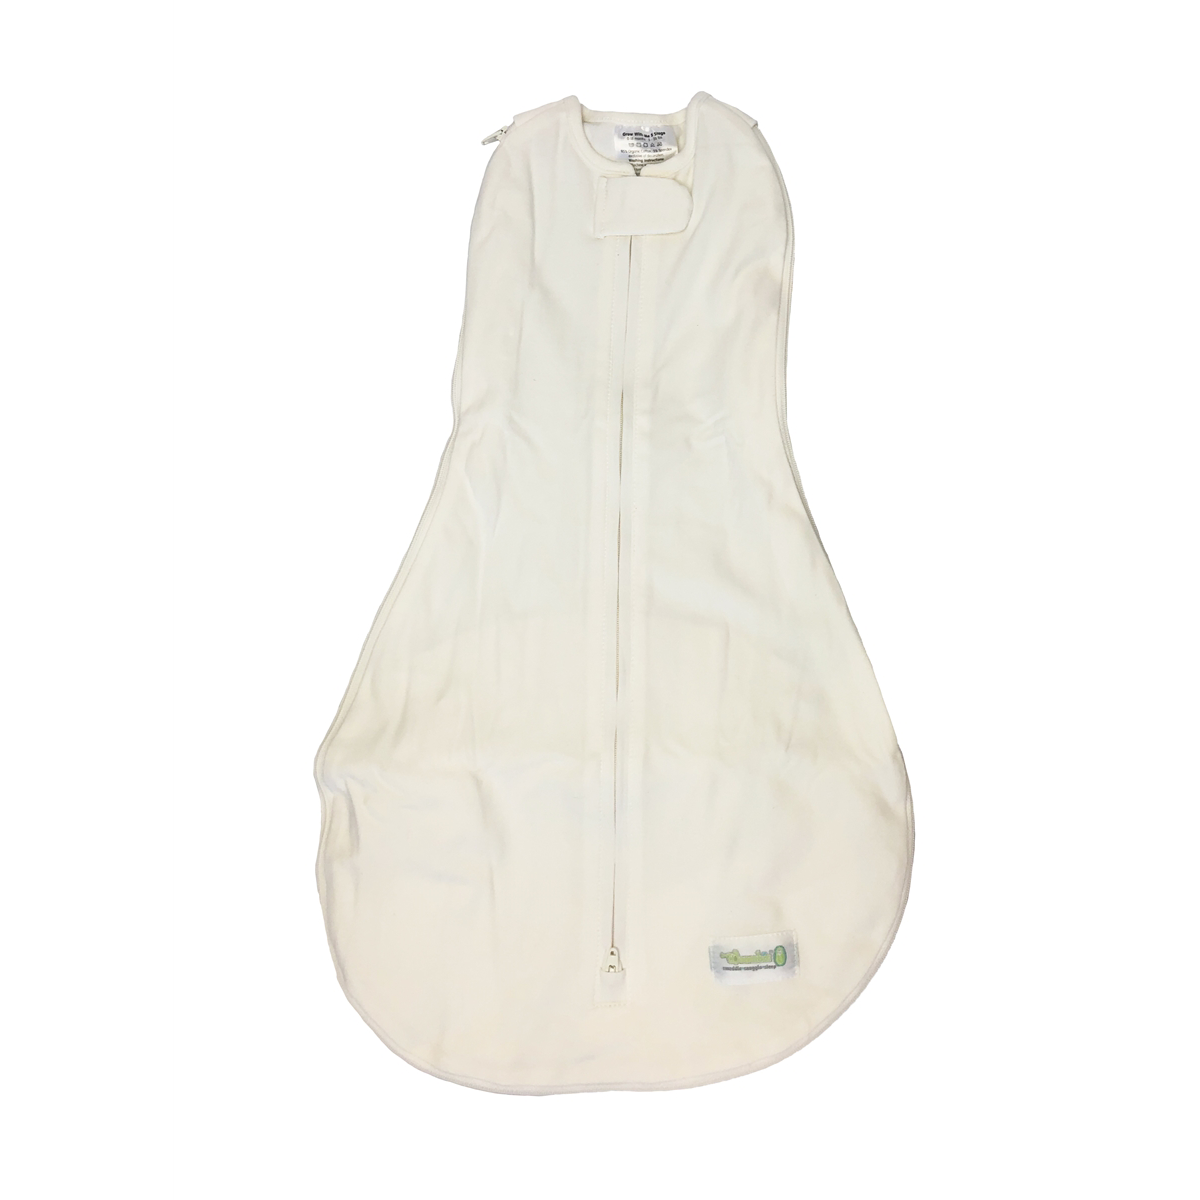 Woombie Grow with Me 5 Convertible Swaddle - Organic Cream